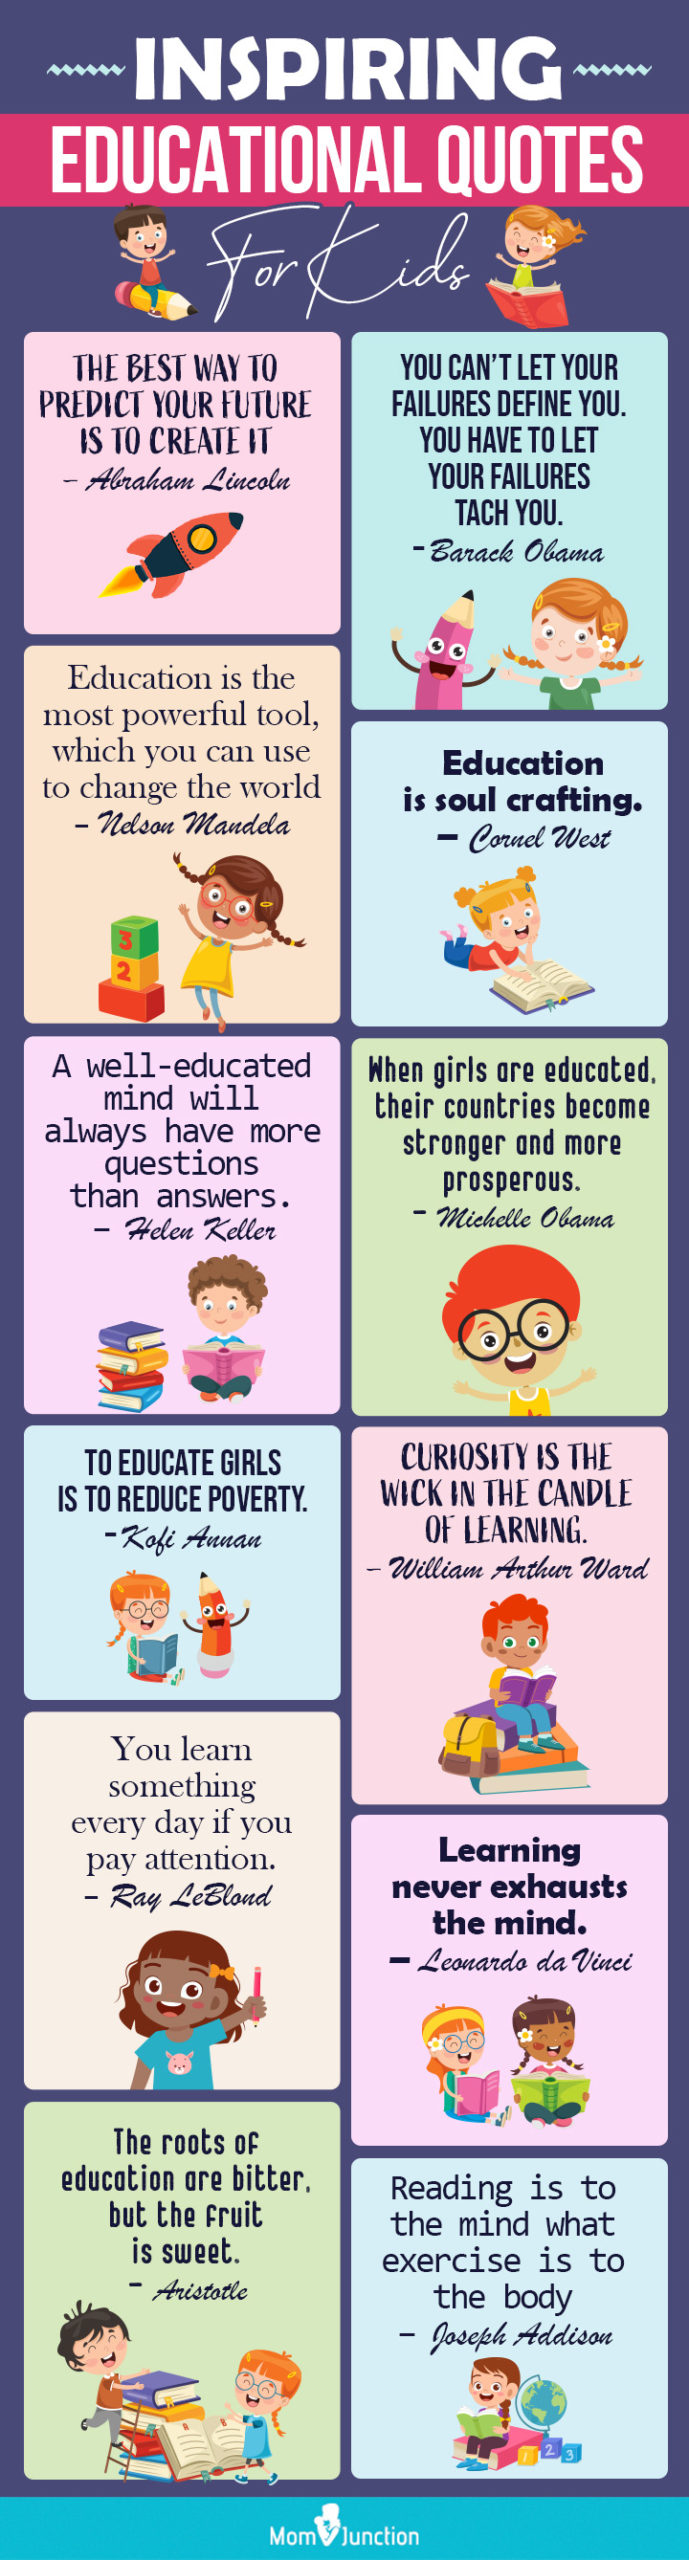 inspiring educational quotes for kids (Infographic)